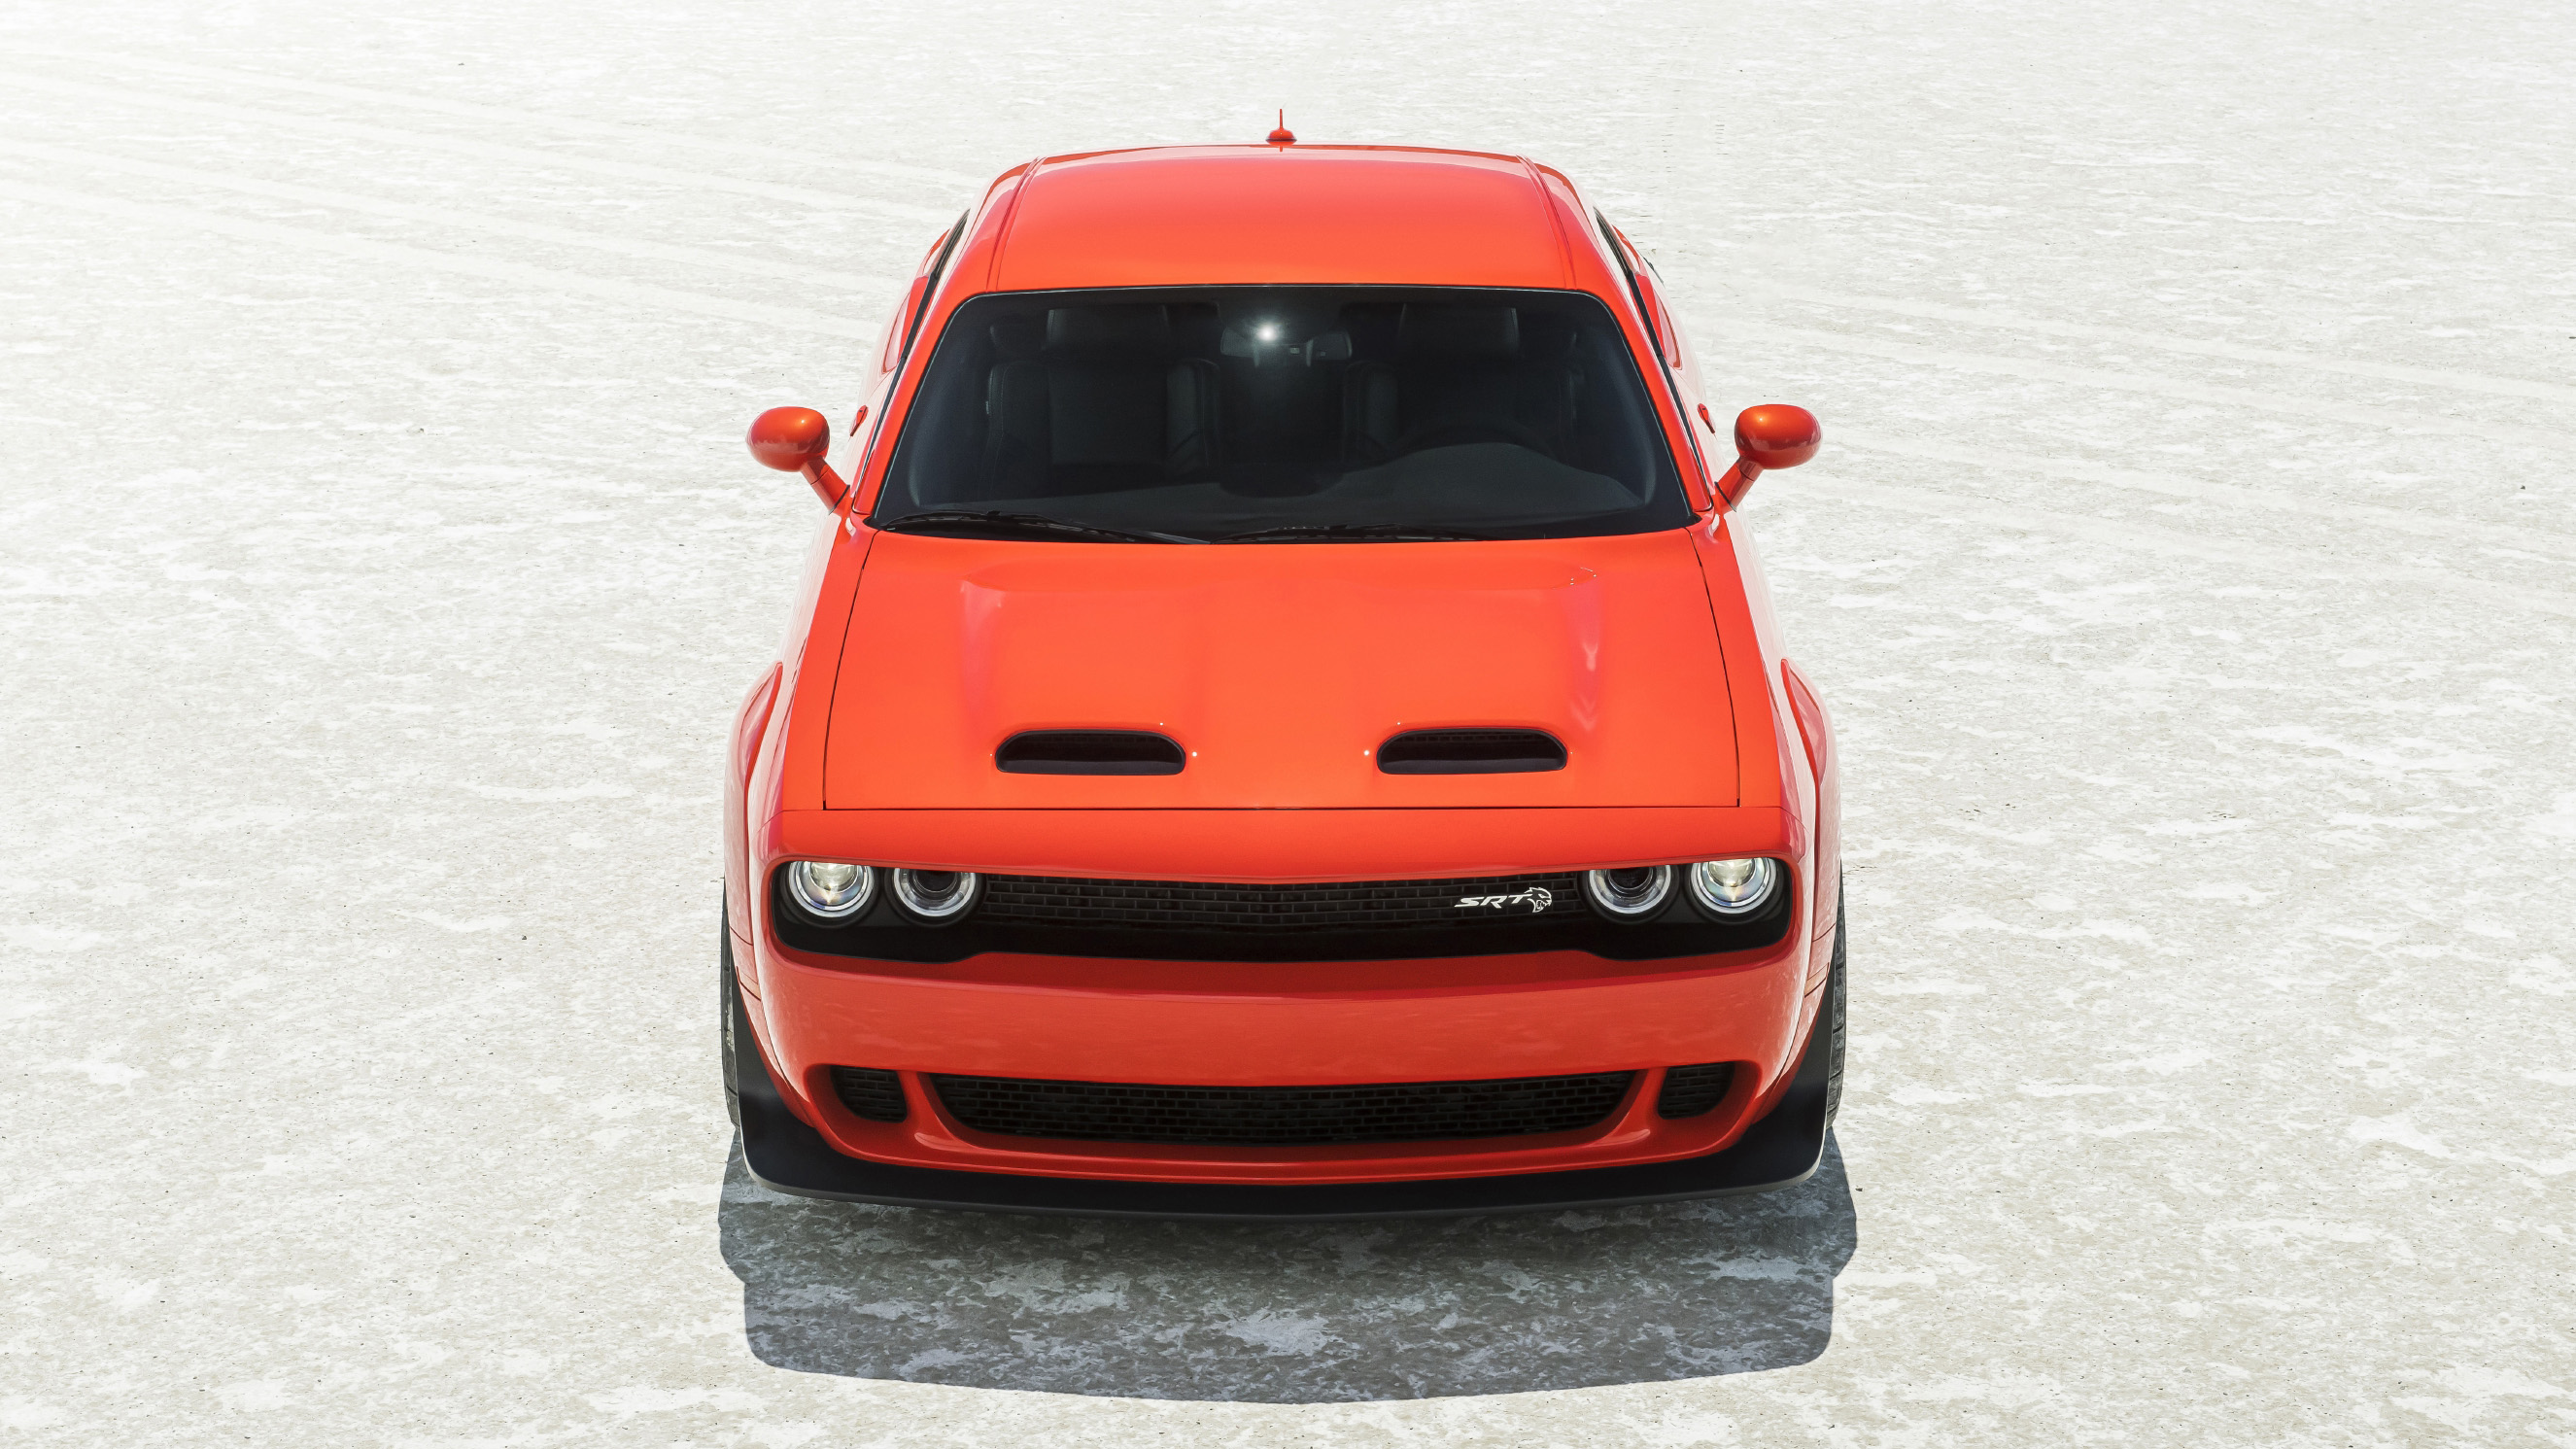 Dodge says the Challenger and the Charger will live on through 2024